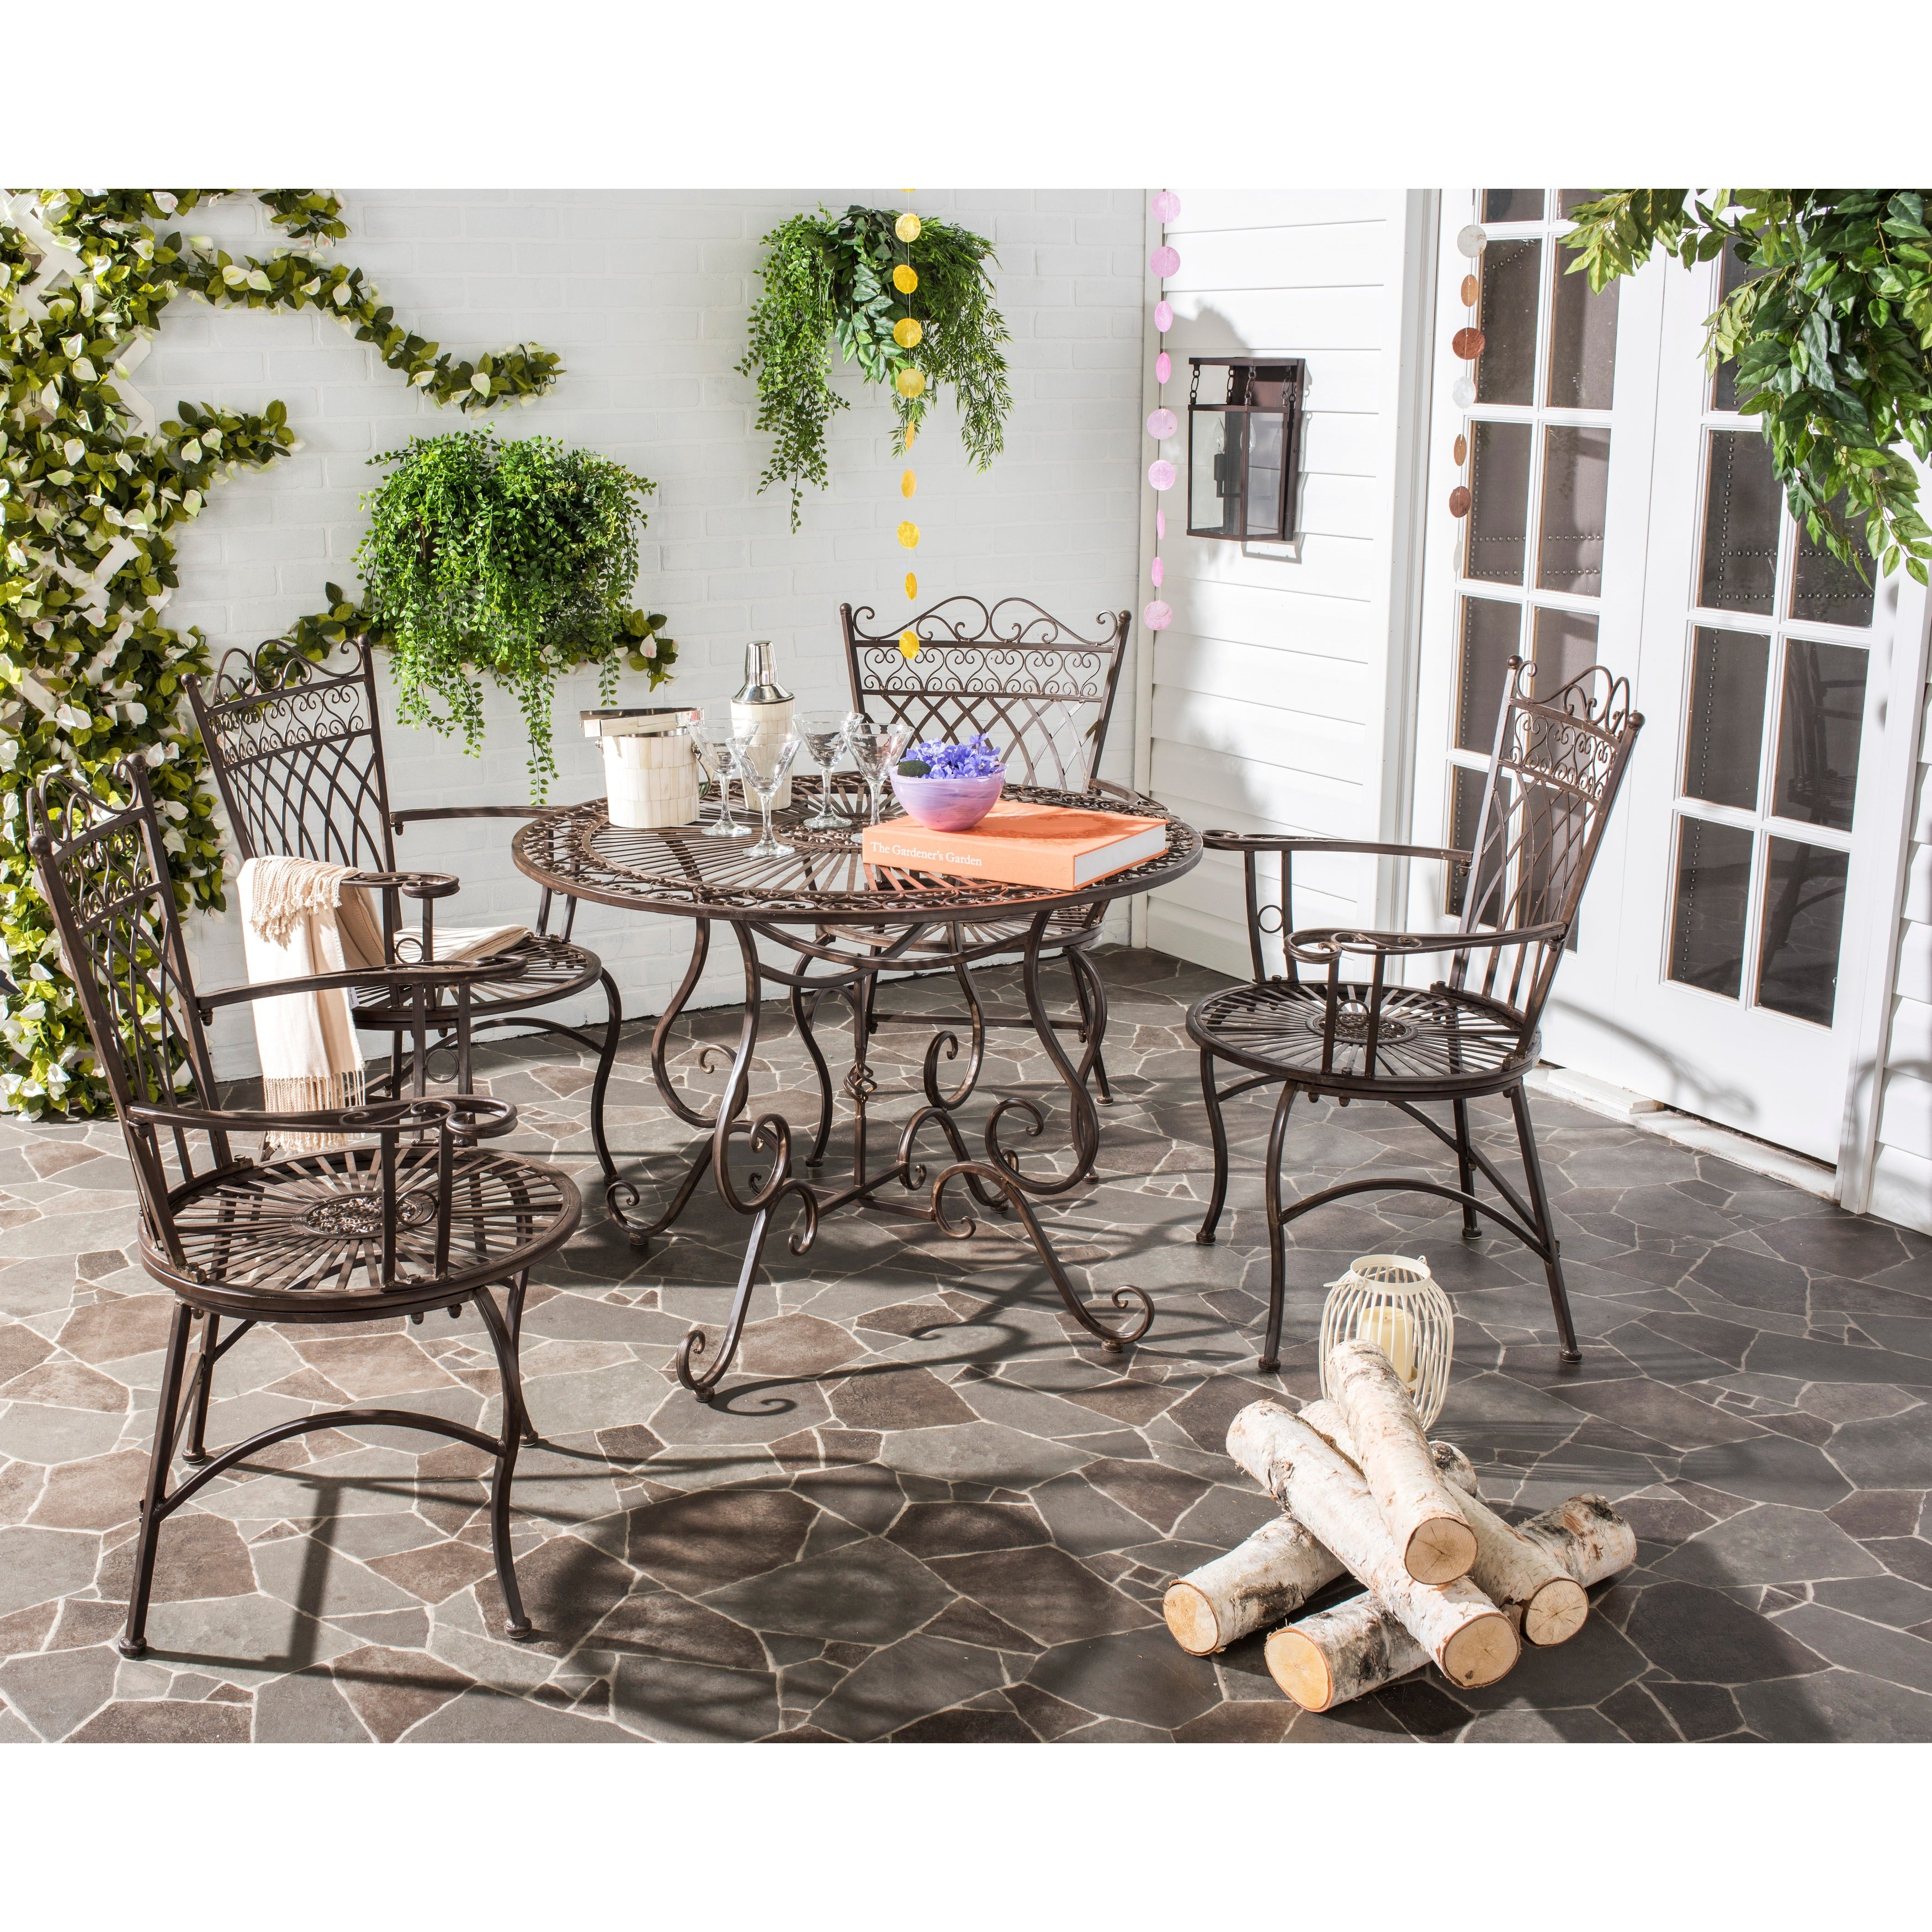 Details About Outdoor Dining Set 5 Table Chairs Vintage Rustic Wrought Iron Patio Furniture within dimensions 3500 X 3500